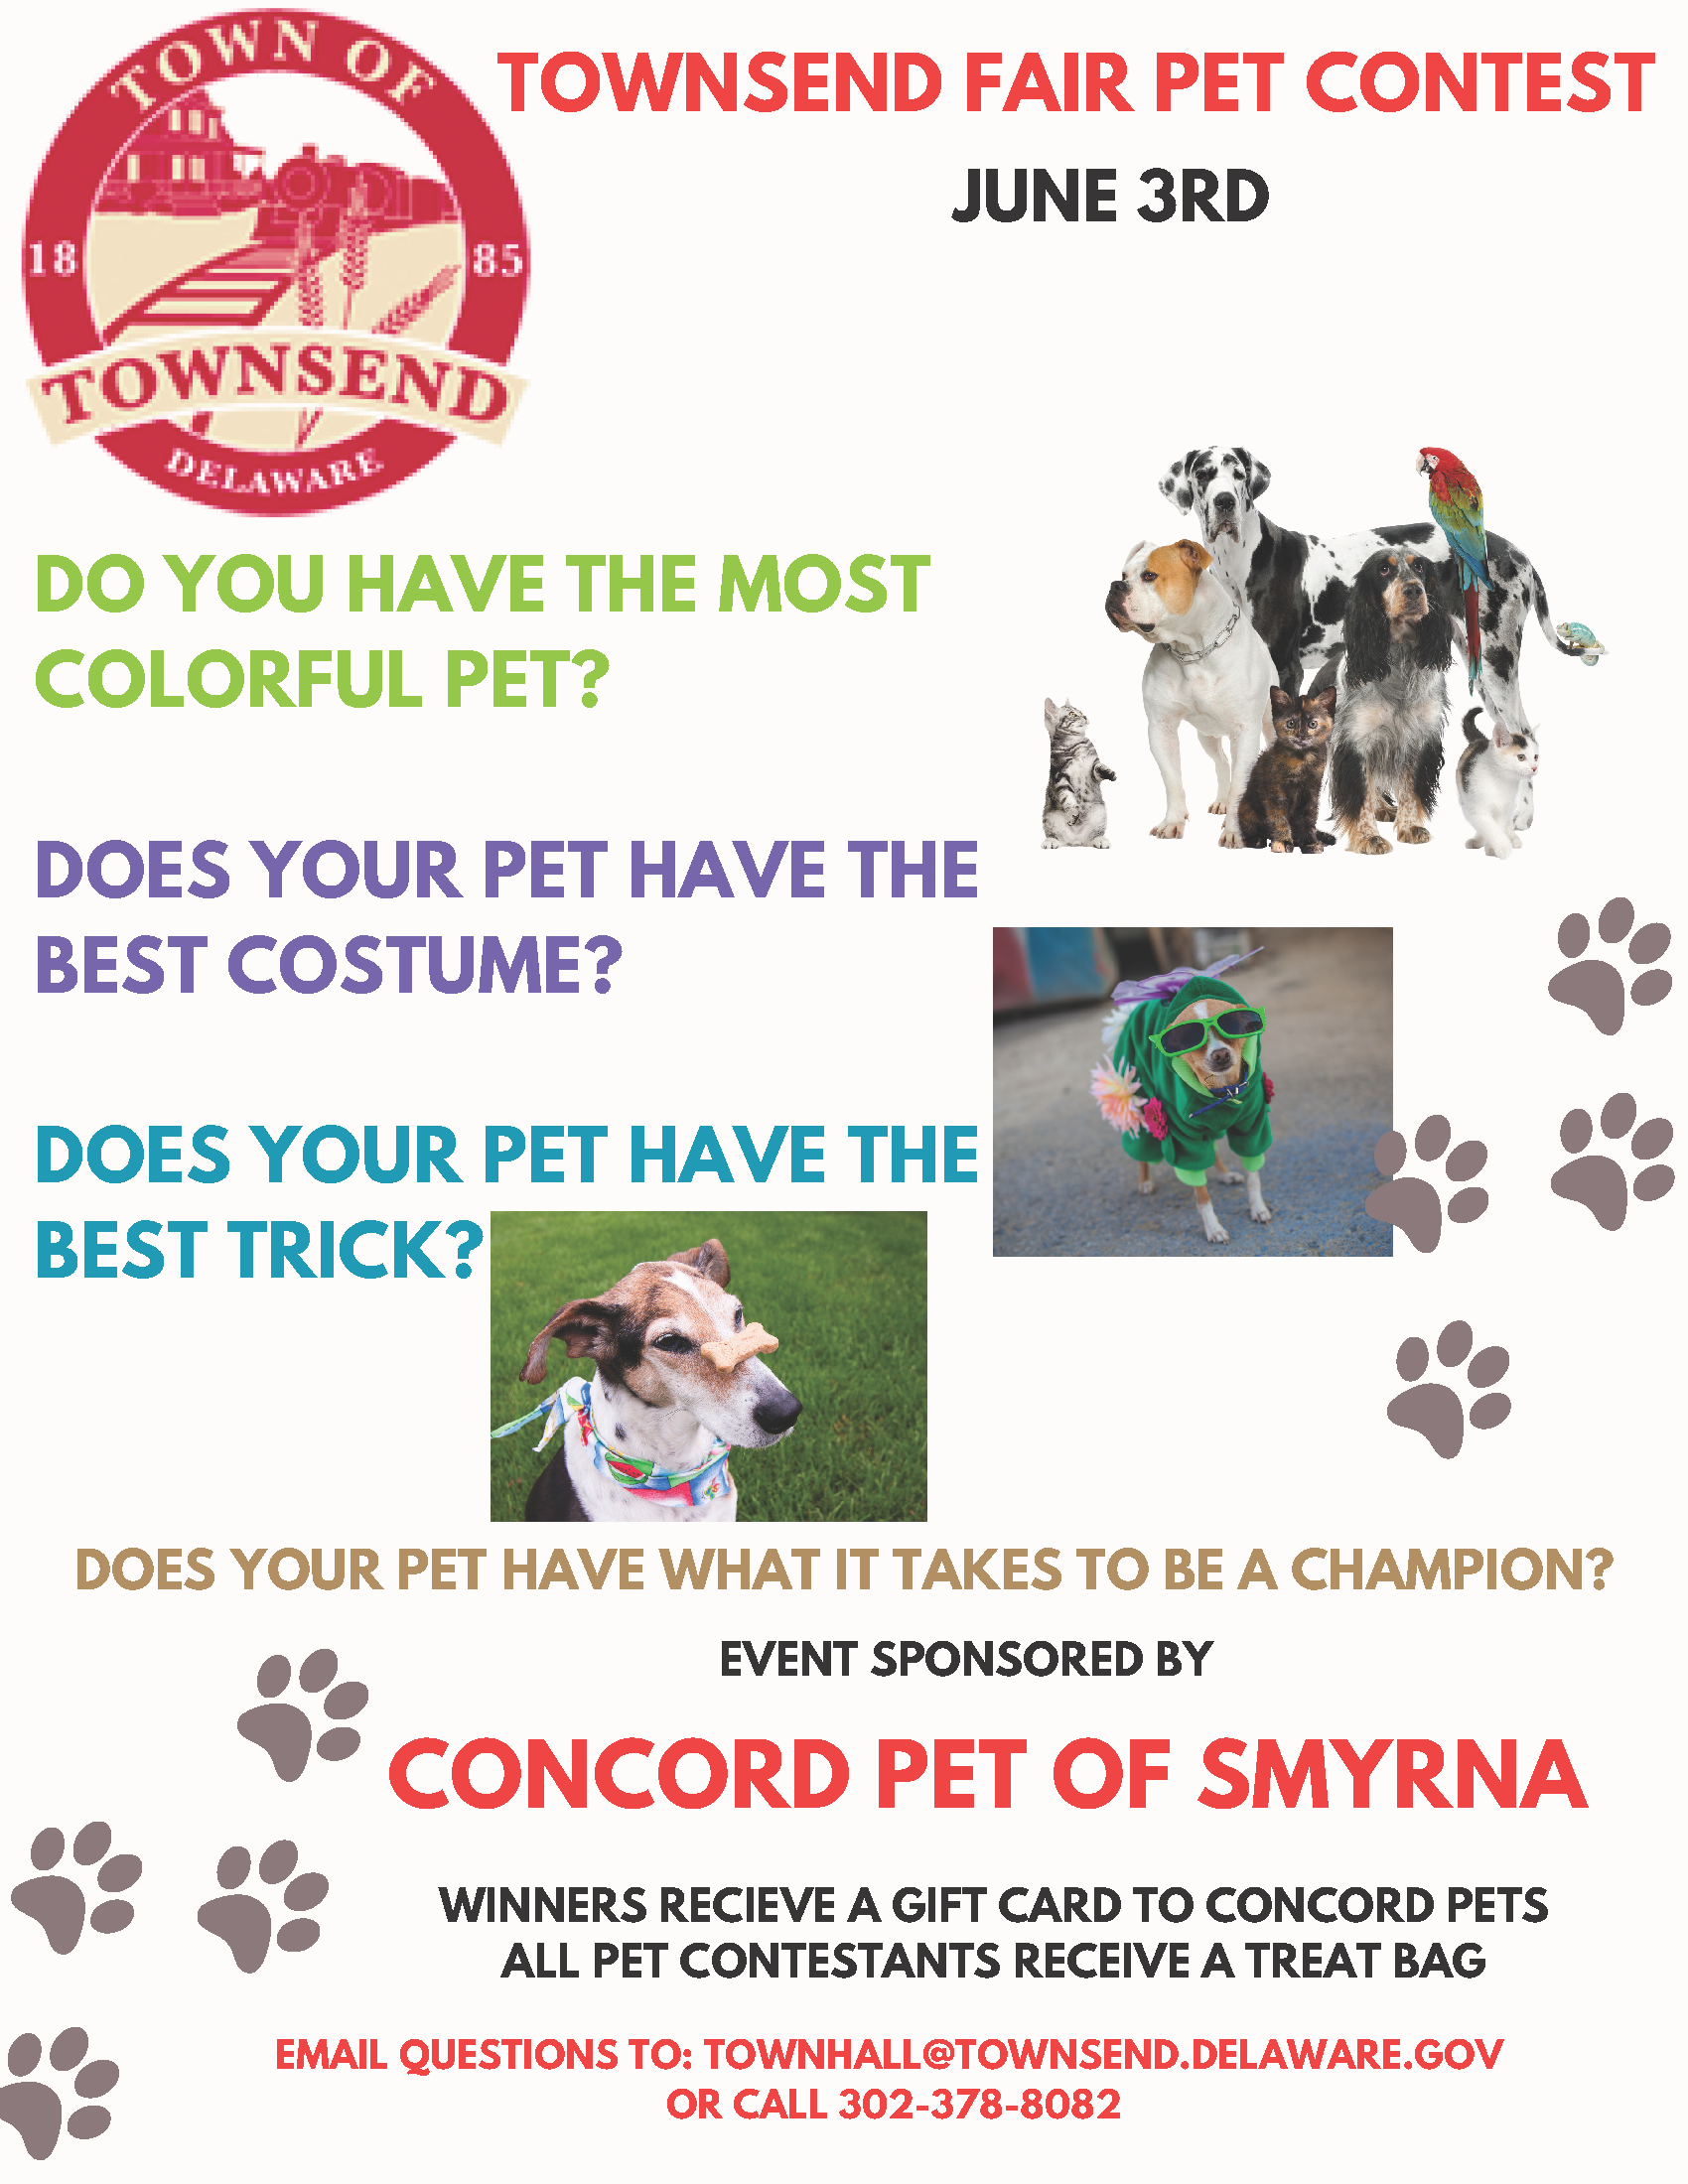 Townsend Fair Pet Contest June 3rd. Do you have the most colorful pet? Does your pet have the best costume? Does your pet have the best trick? Does your pet have what it takes to be a champion? Event sponsored by Concord Pet of Smyrna. Winners receive a gift card to concord pets.  All pet contestants receive a treat bag.